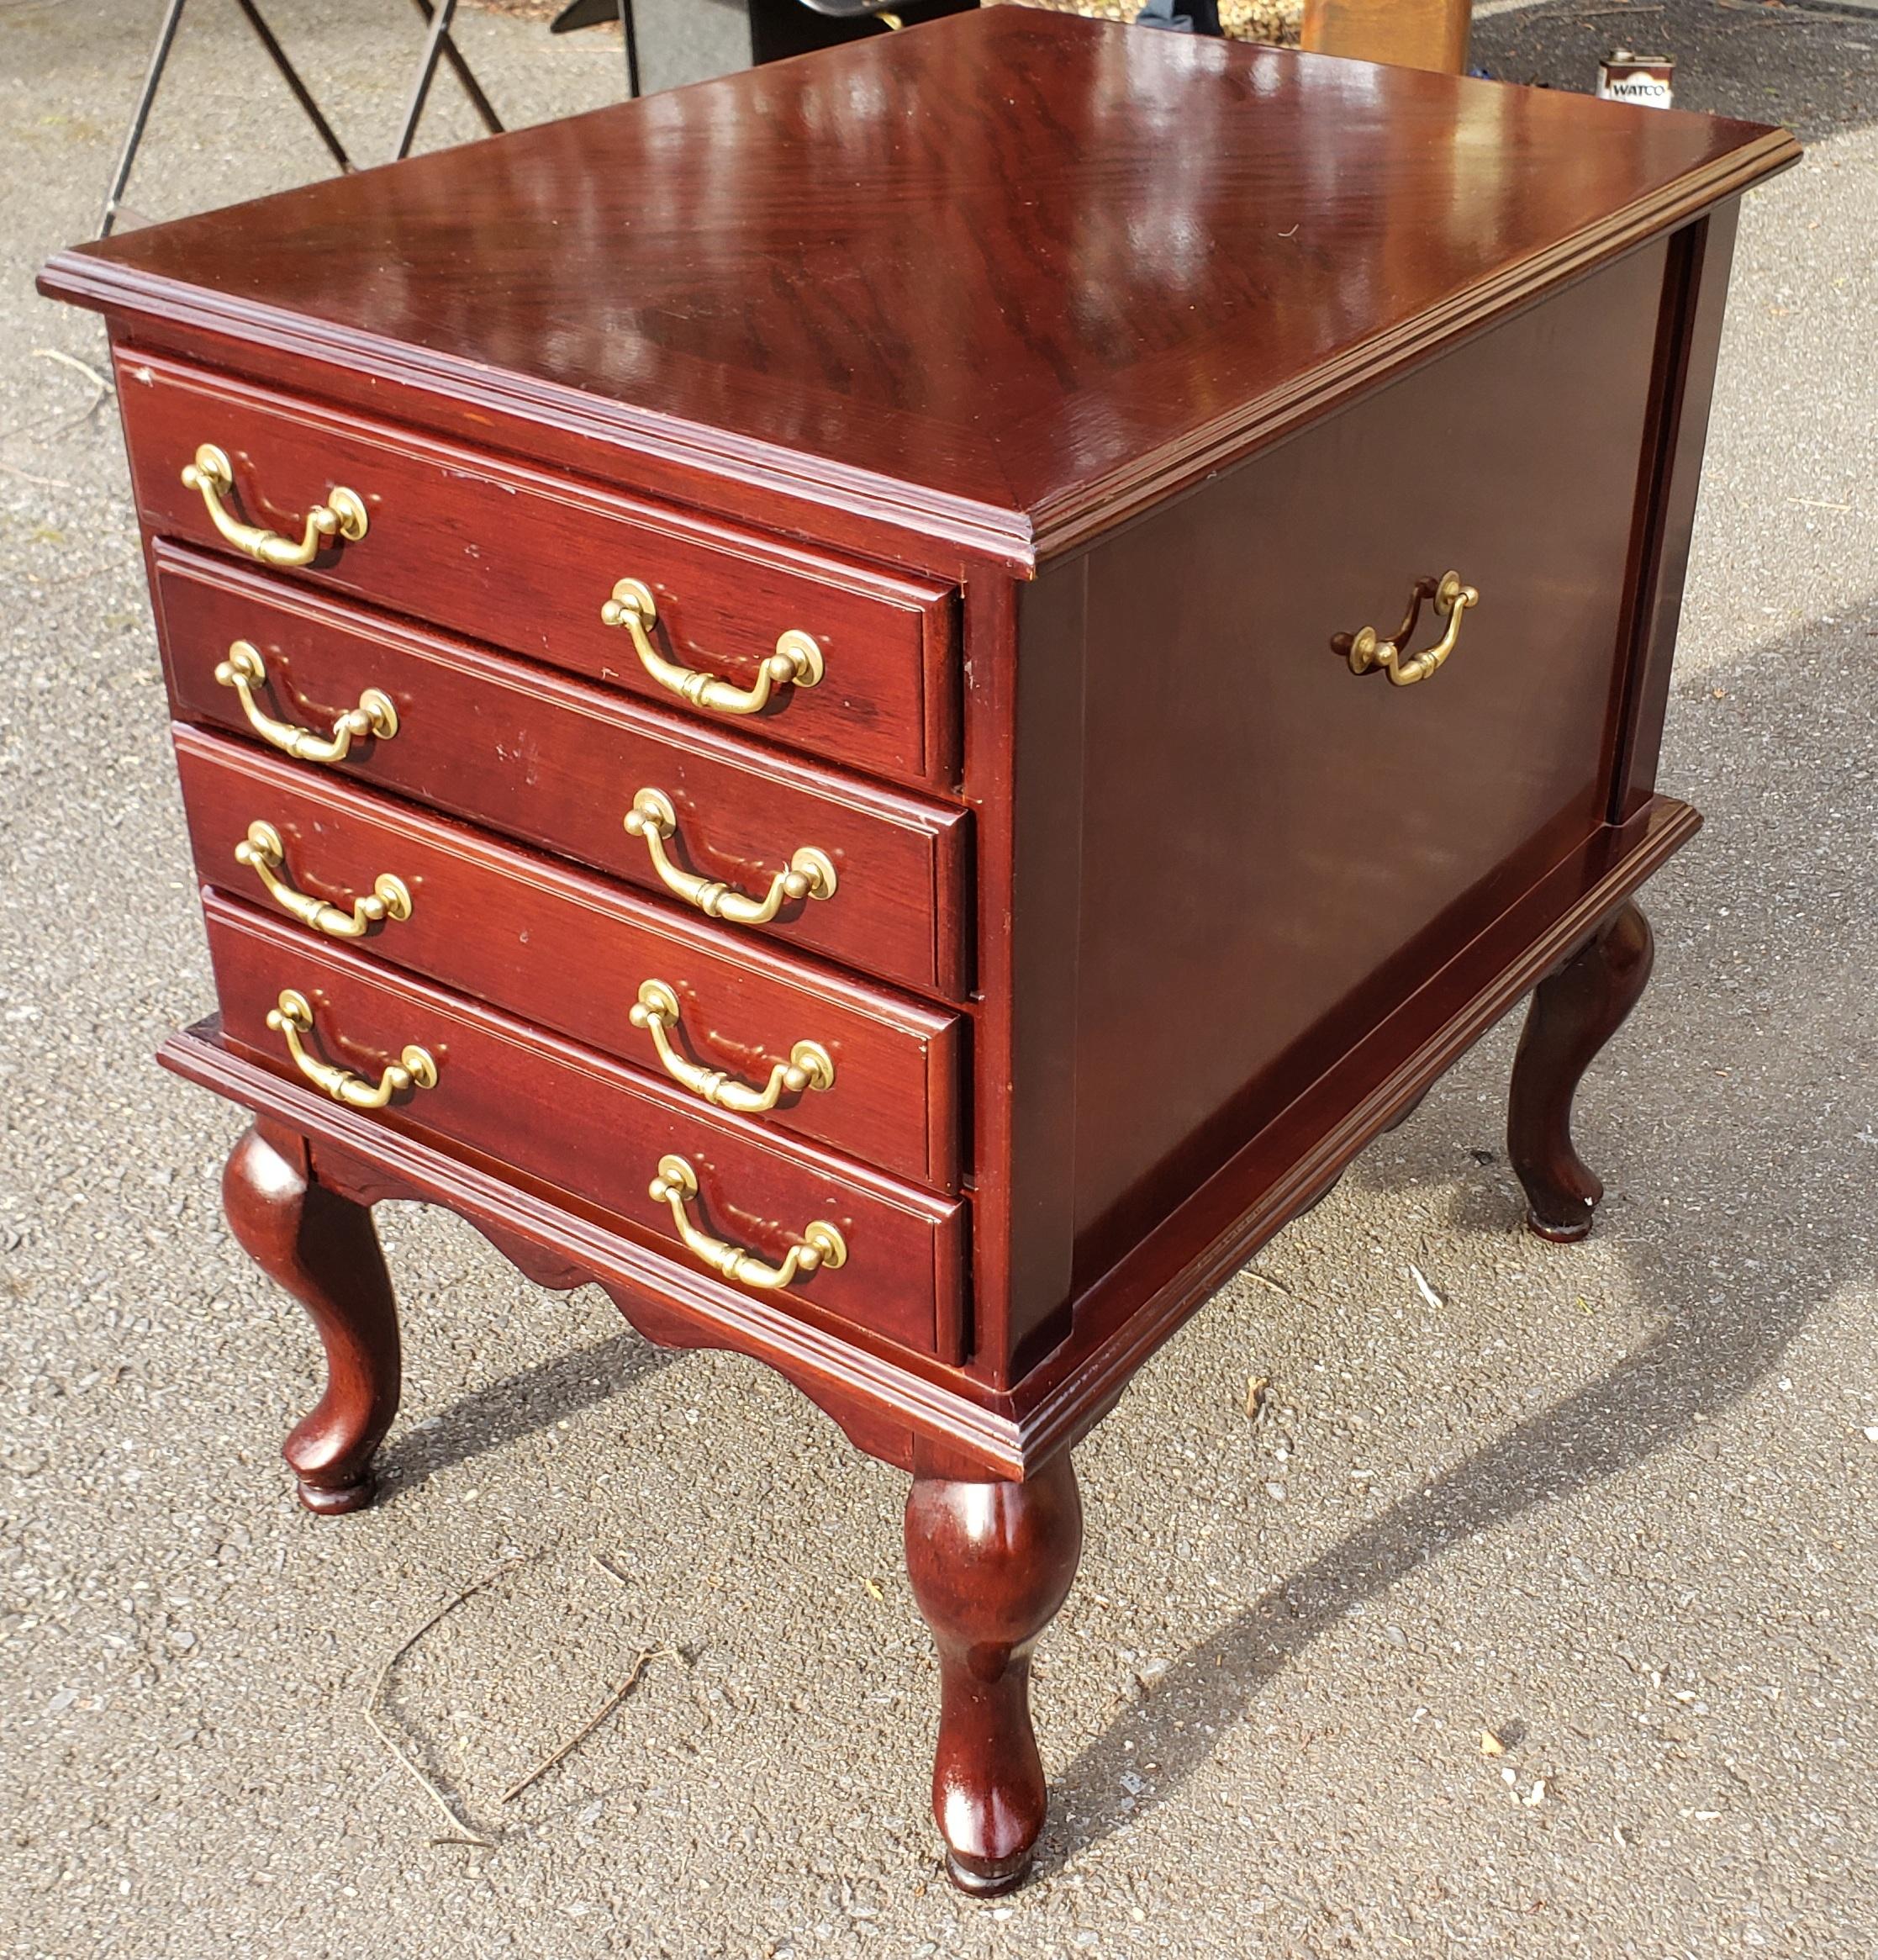 Rare Allen Classics Mahogany TV tray table cabinet with 4 beautiful tray tables will add practicality, convenience, and elegance to any room in the house. Each table has folding legs and slides right into the side table cabinet for storage.
  